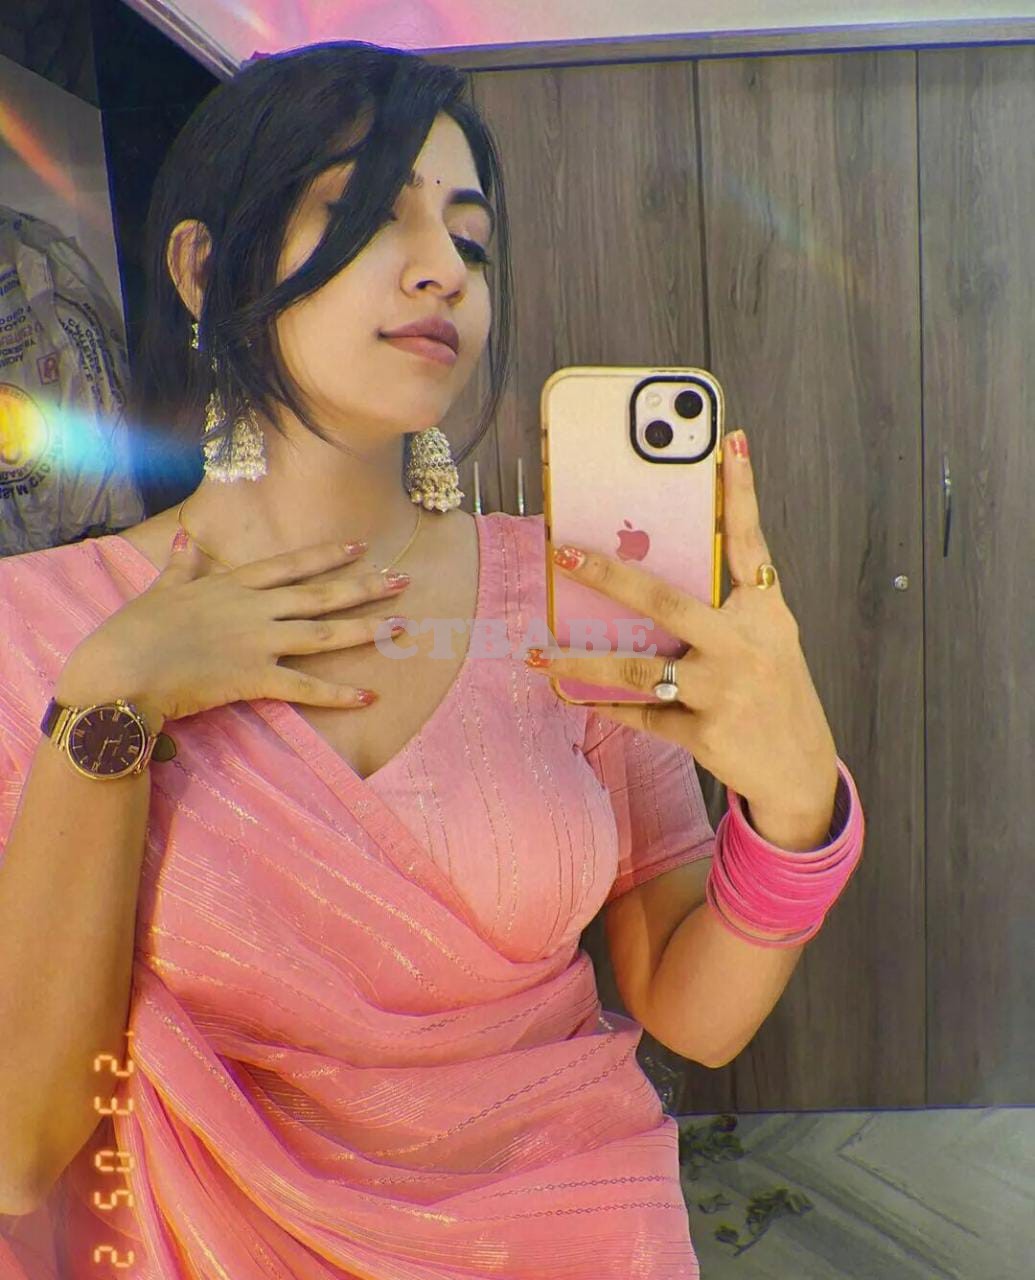 Call Girls Service In Delhi Ncr Dail -9870412668 Book Now Pay Later